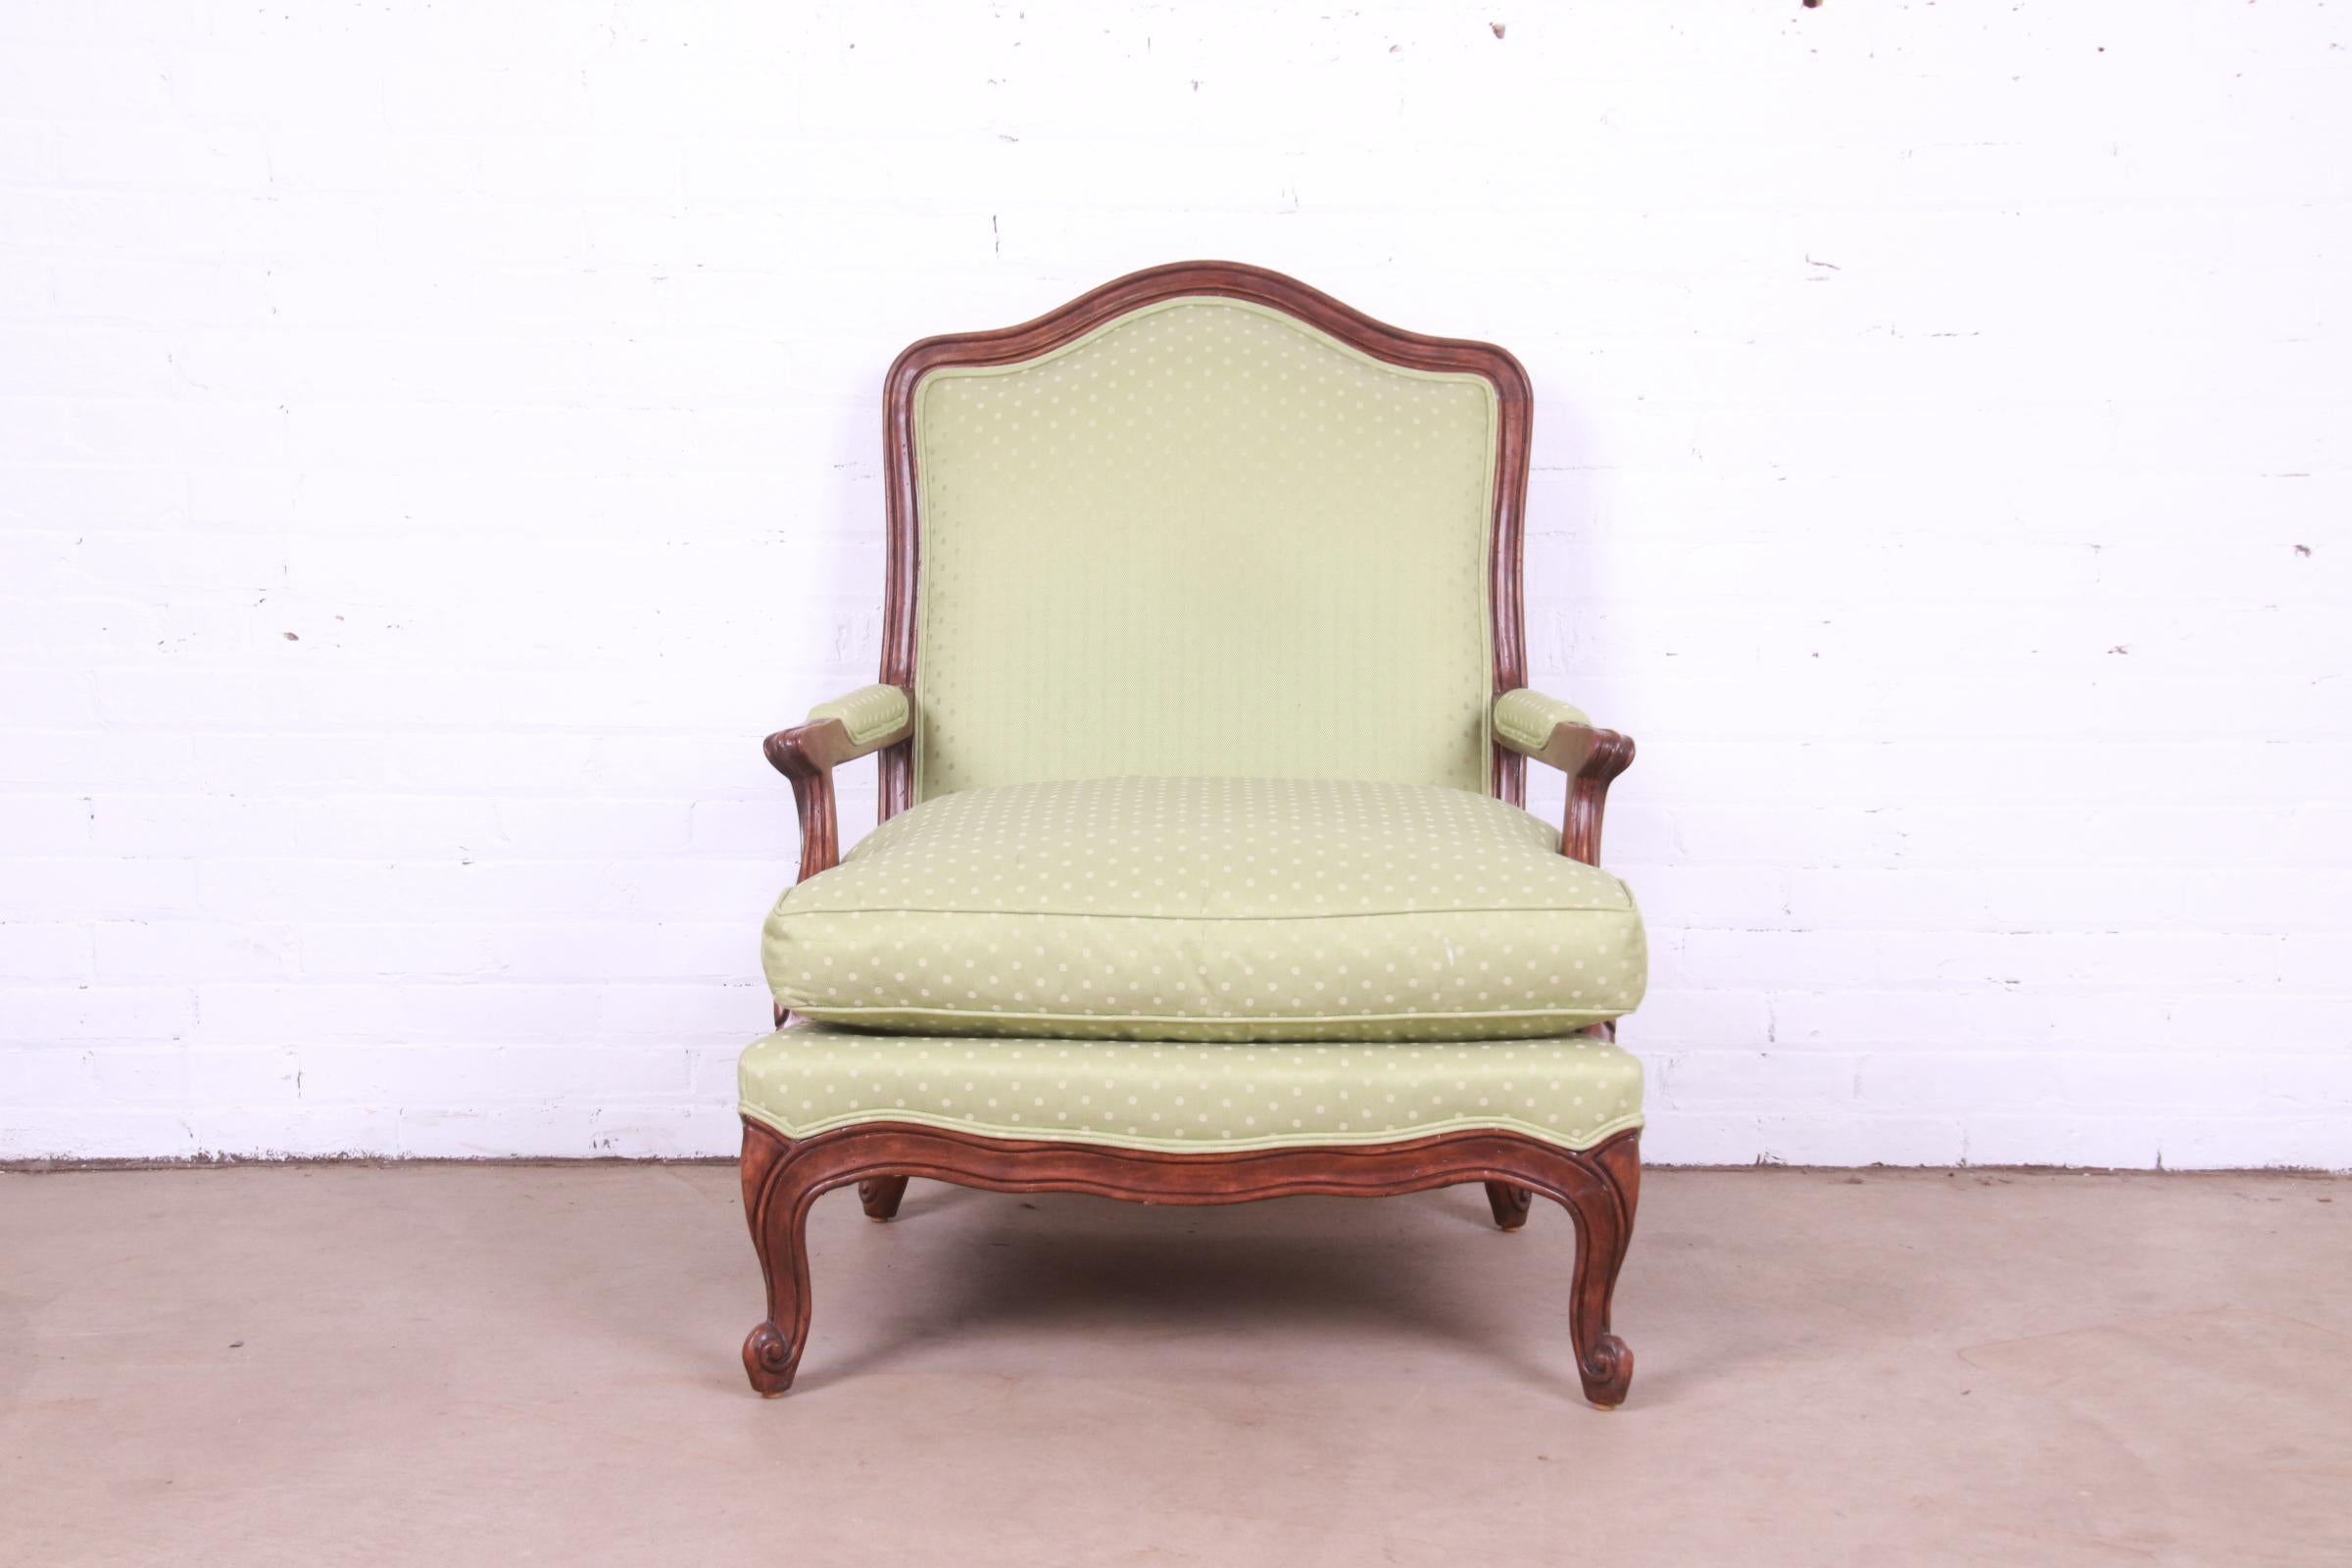 Minton-Spidell French Provincial Carved Walnut Upholstered Fauteuil with Ottoman For Sale 4